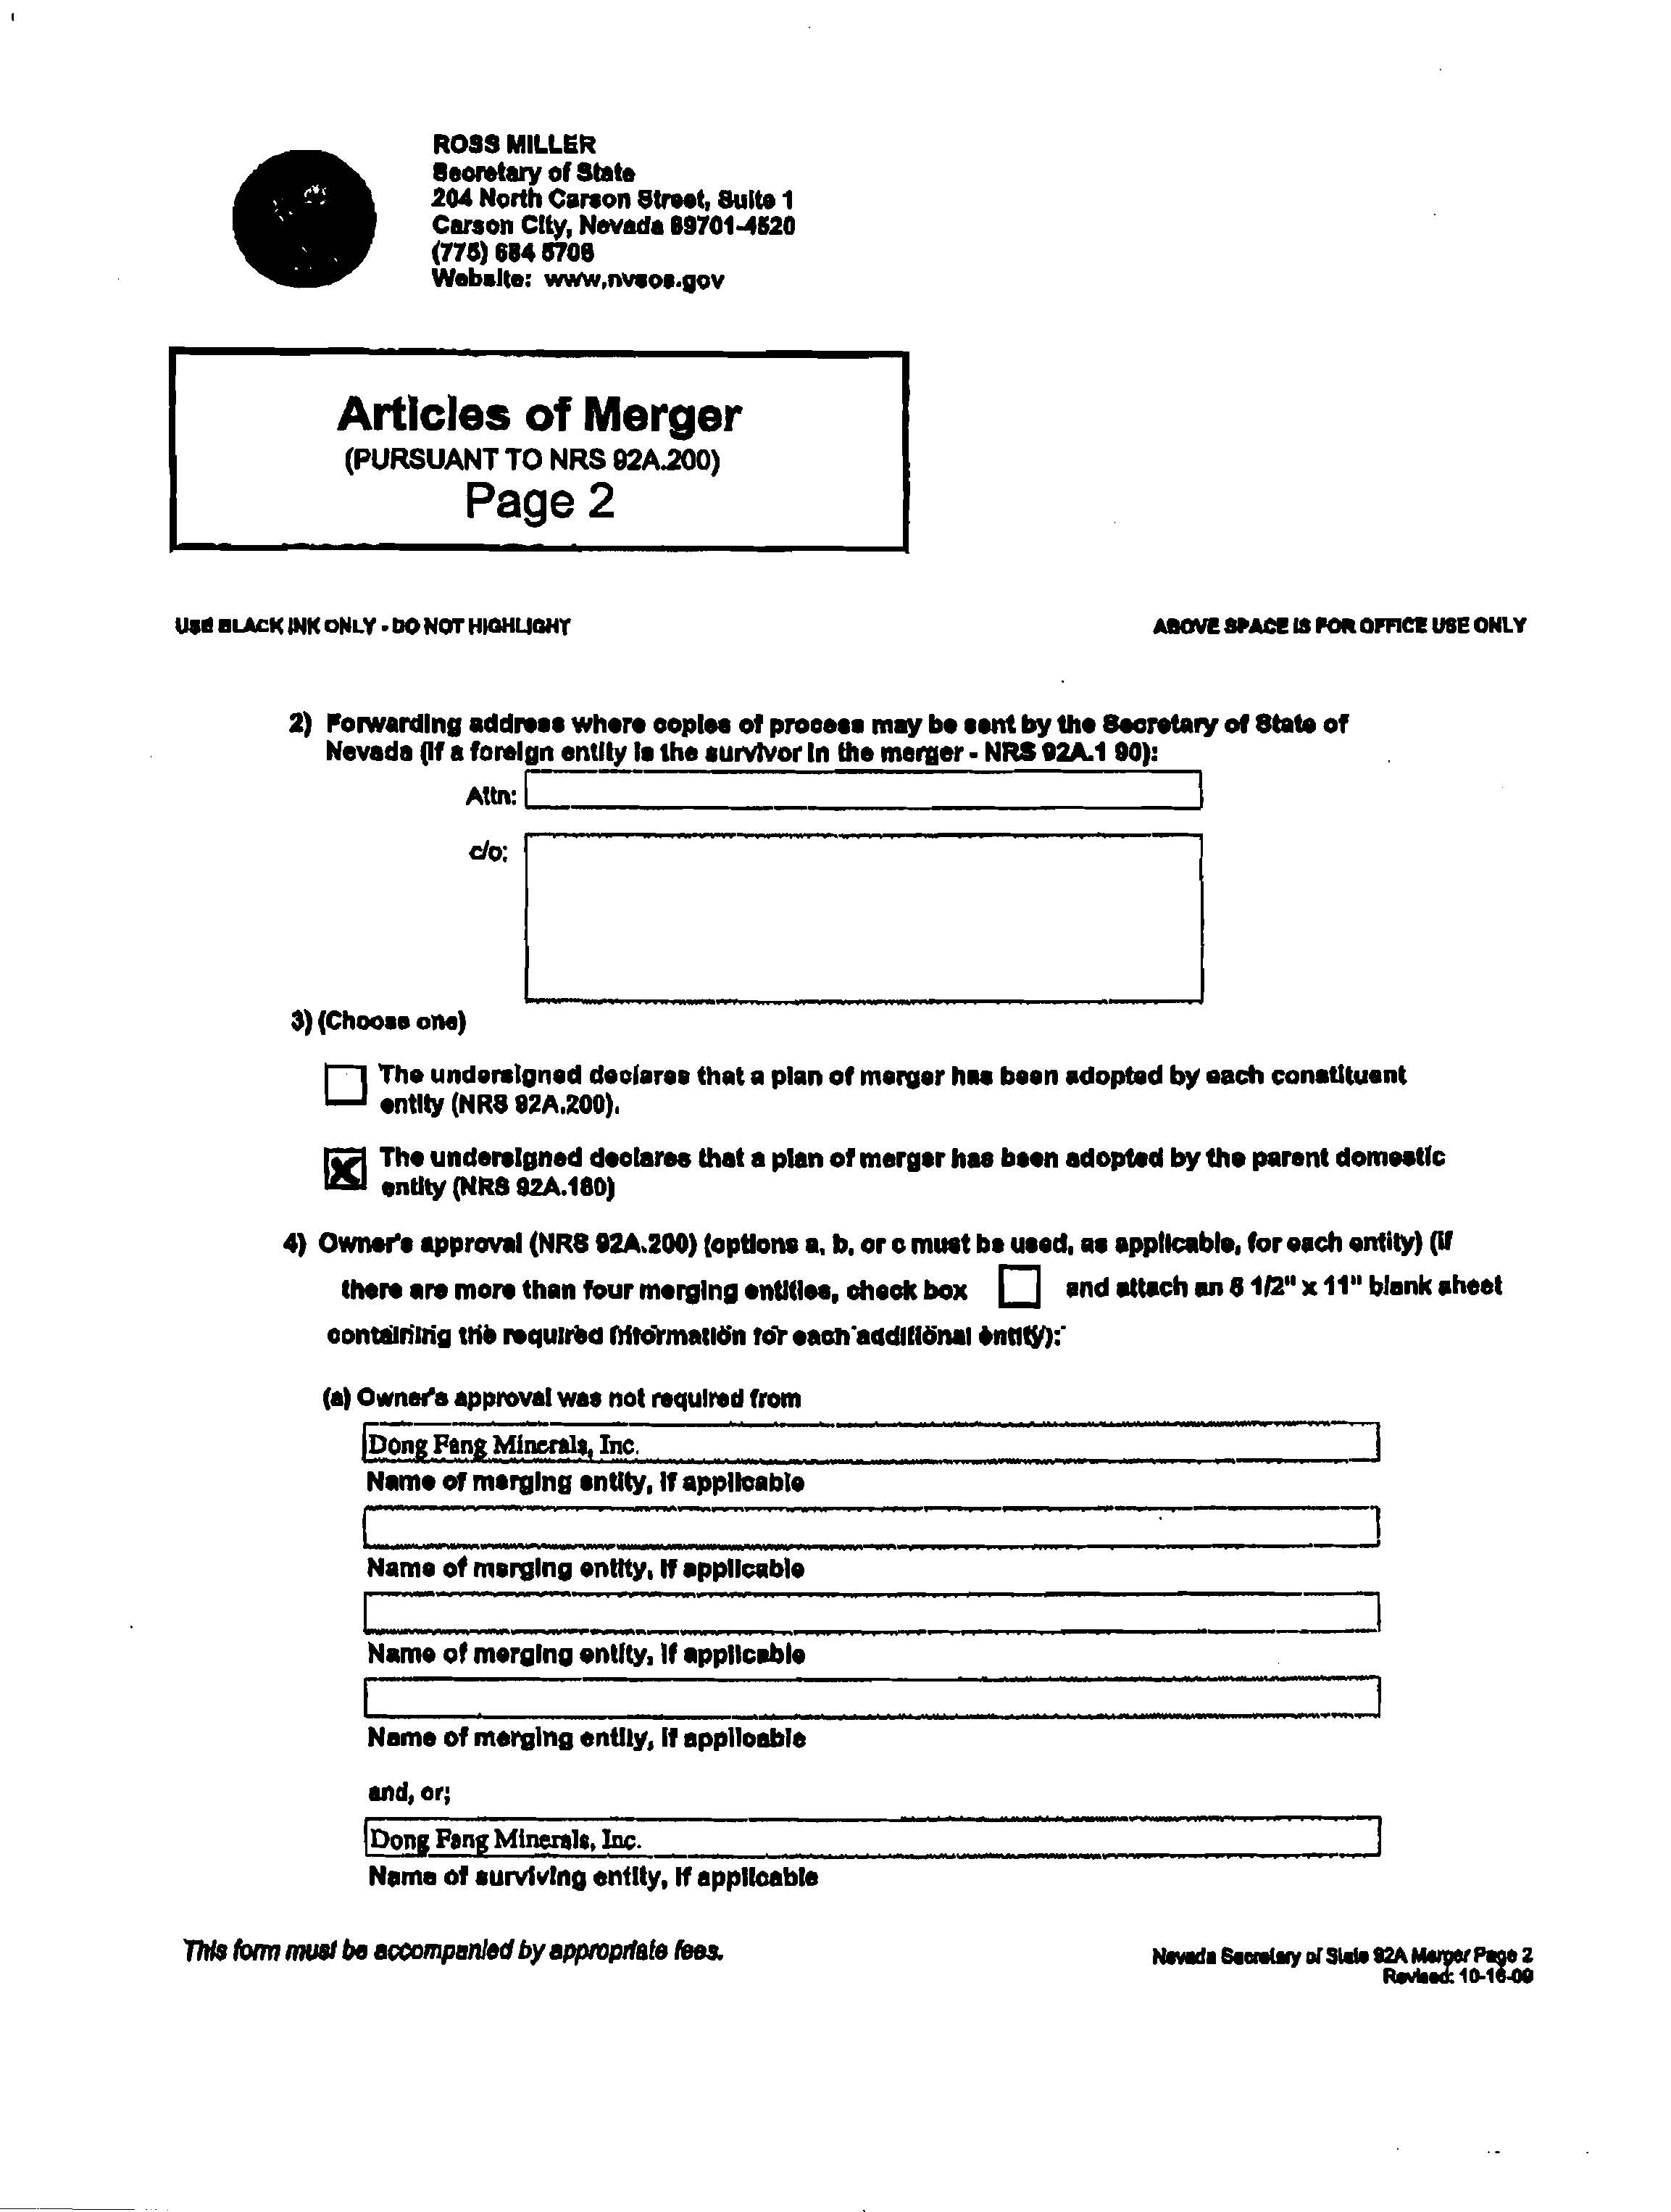 Articles of Merger - Page 2.